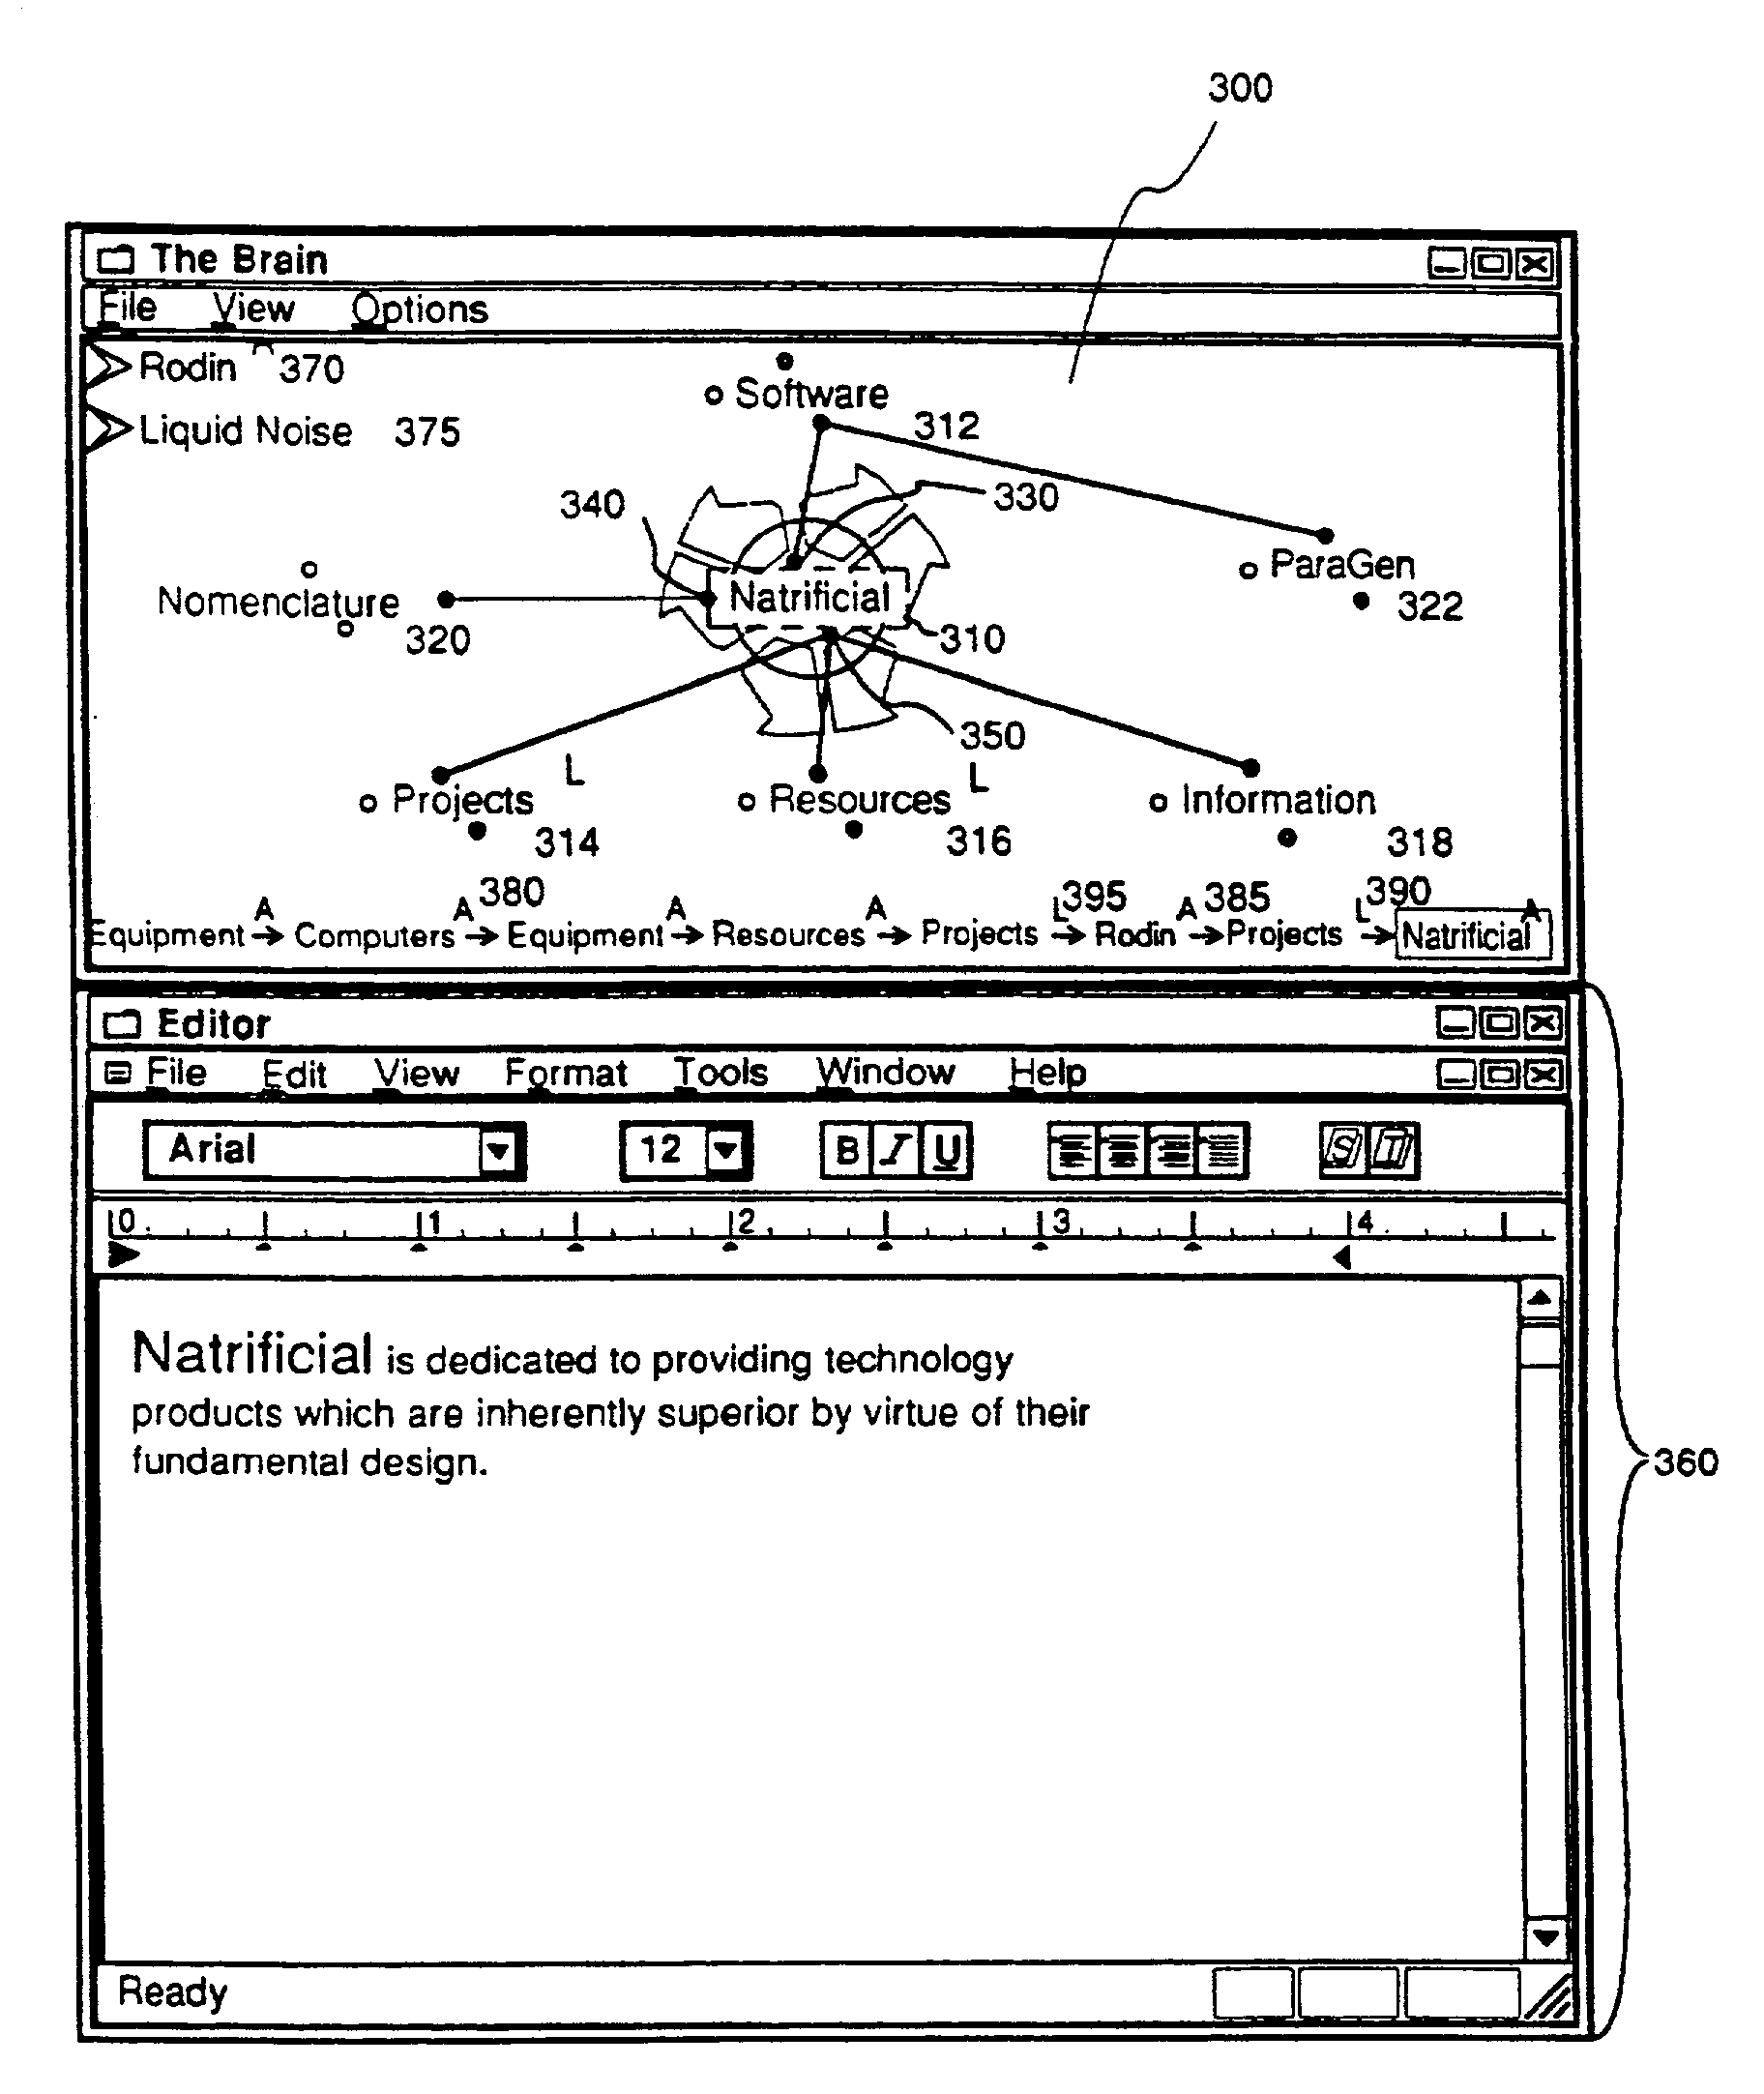 Method and apparatus for communicating changes from and to a shared associative database using one-way communications techniques